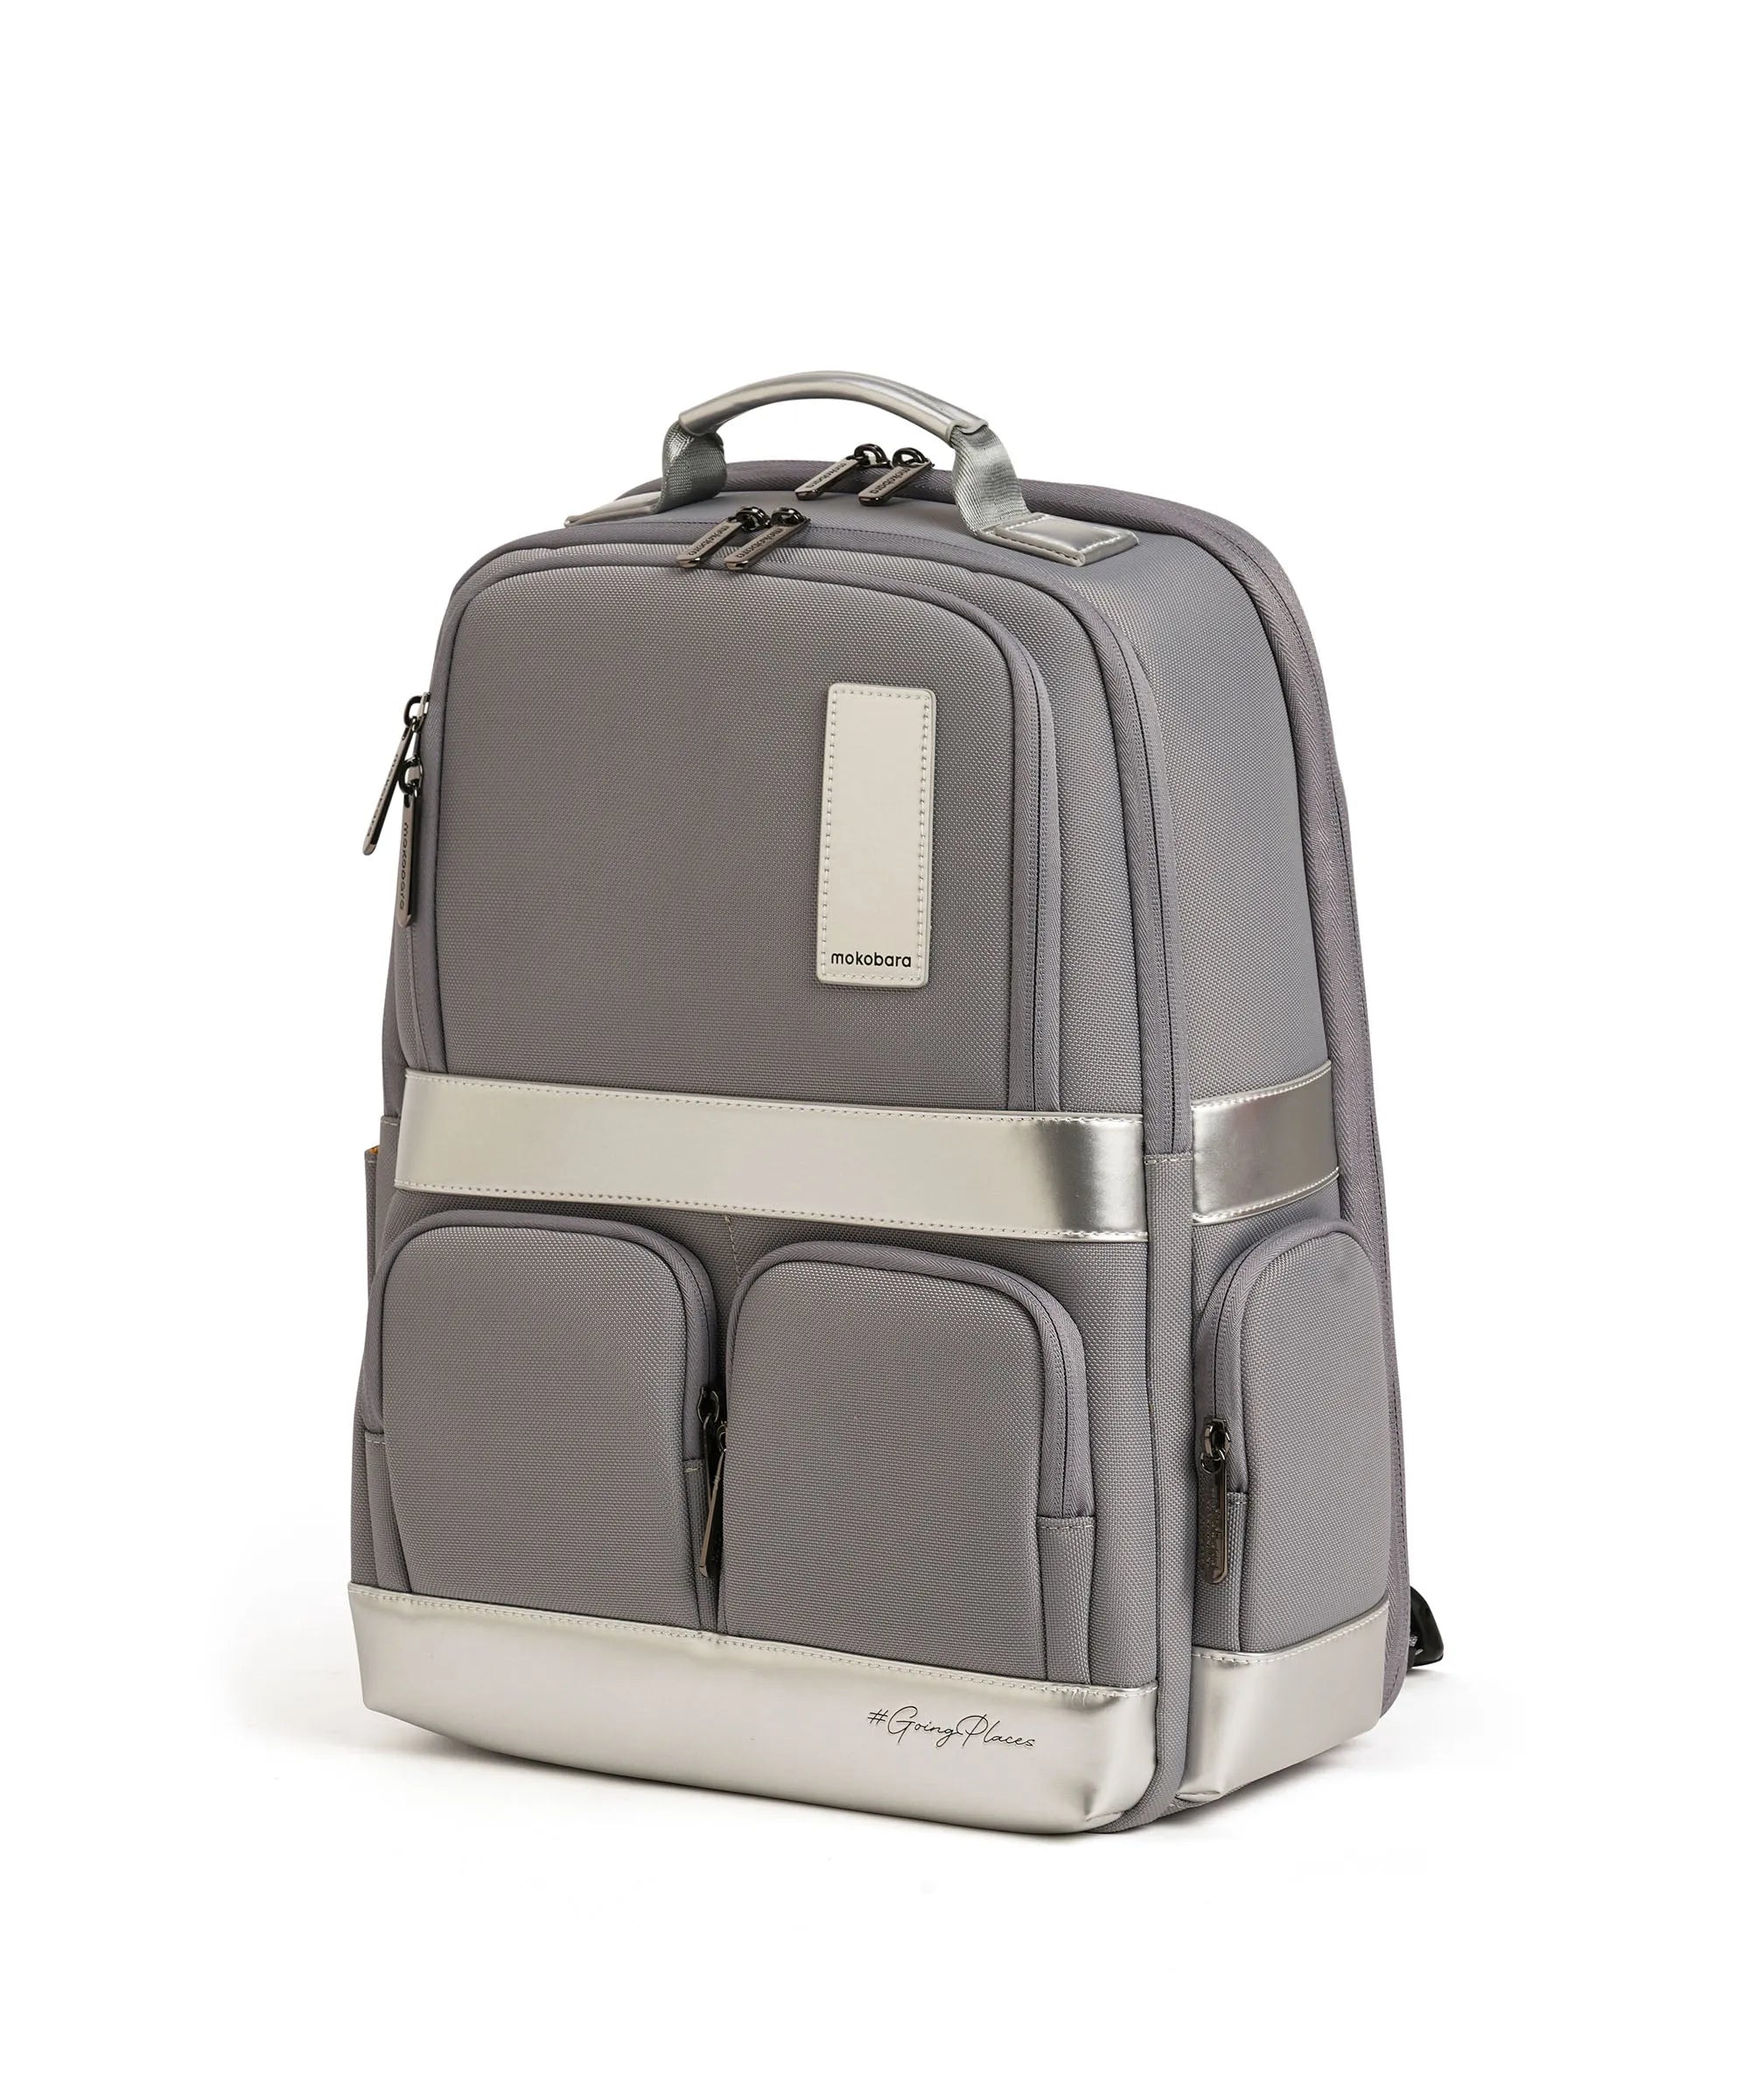 Color_ Reflection Day | The Terra Work Backpack